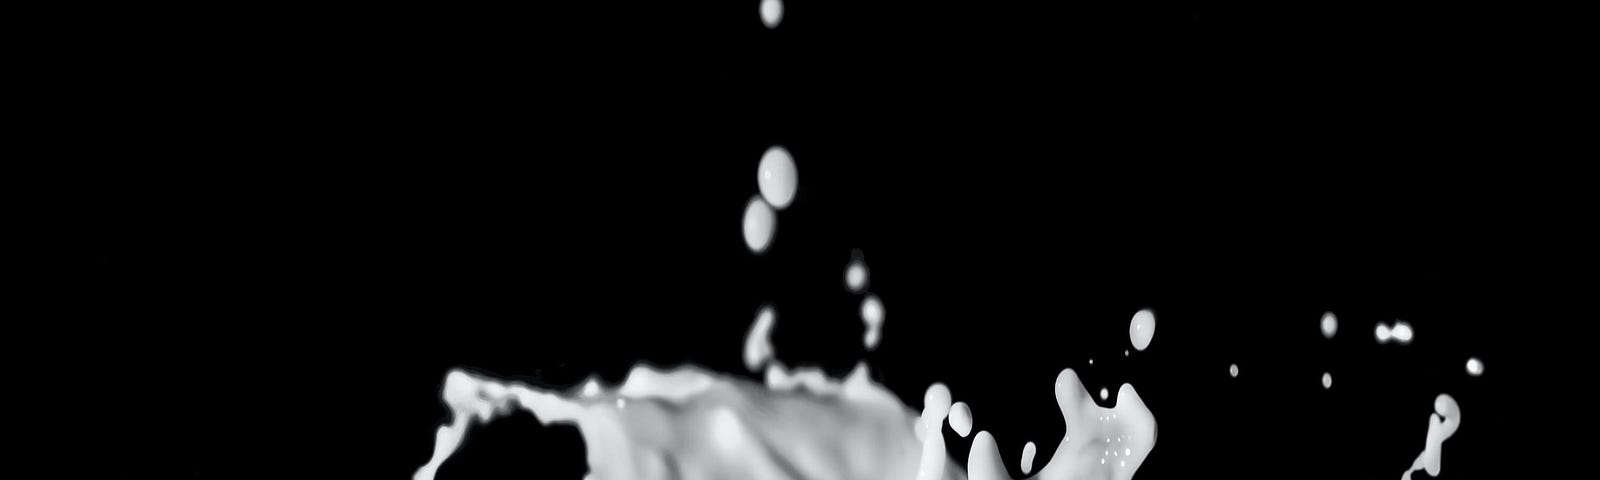 white splash of milk on black background, commercial dairy in the US